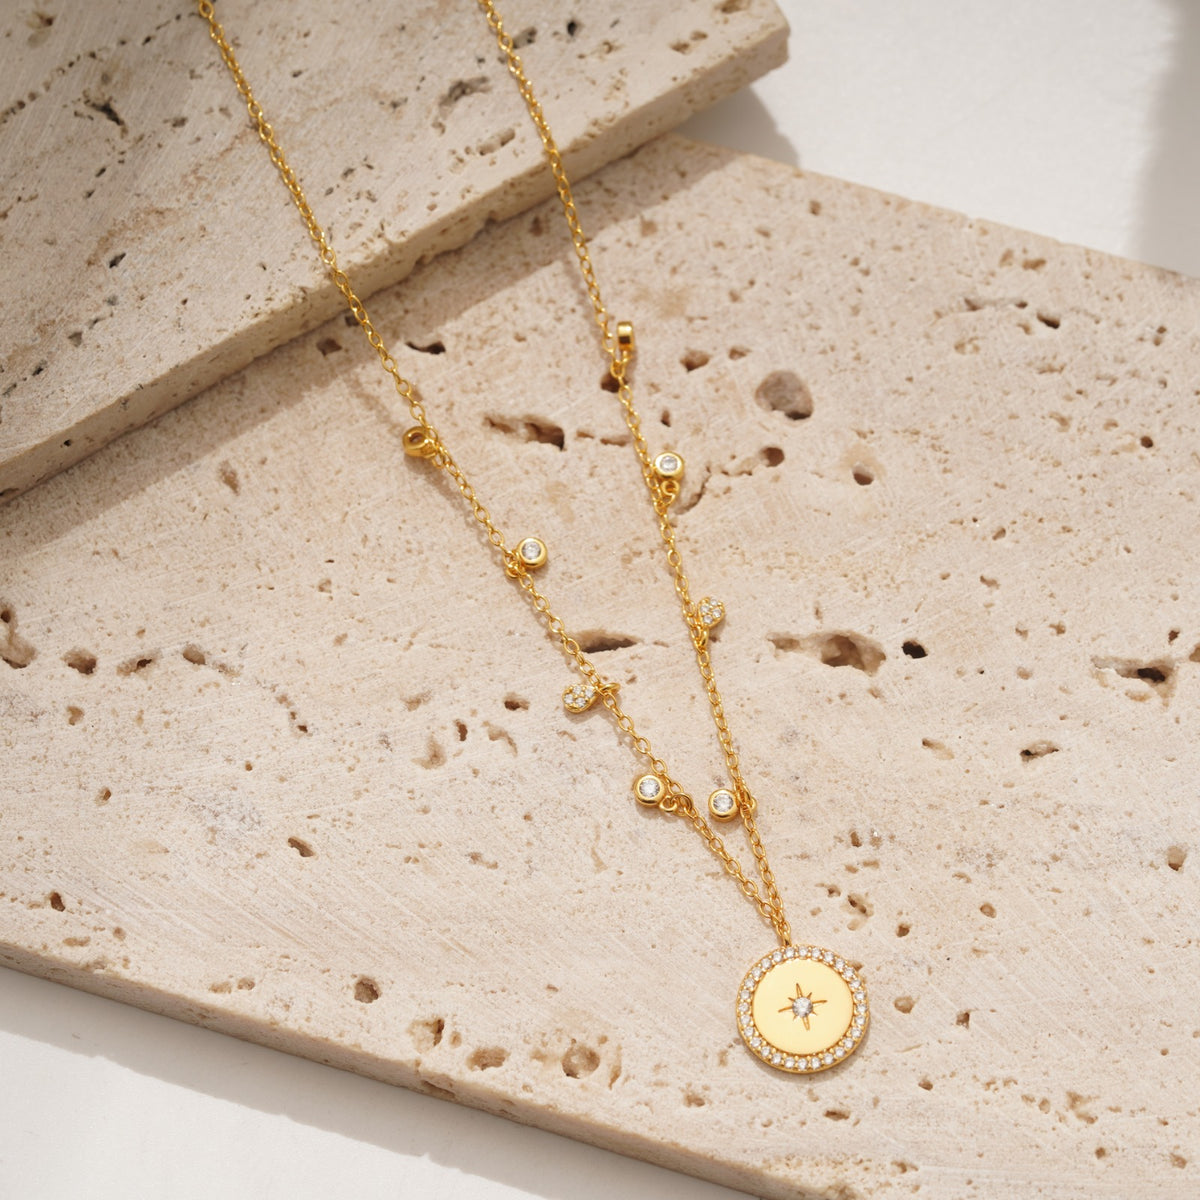 the nova necklace is a beautiful and elegant necklace that features 8 radiant stars that guide the eye towards the north star. Each star shimmers and beckons us towards our dreams. 